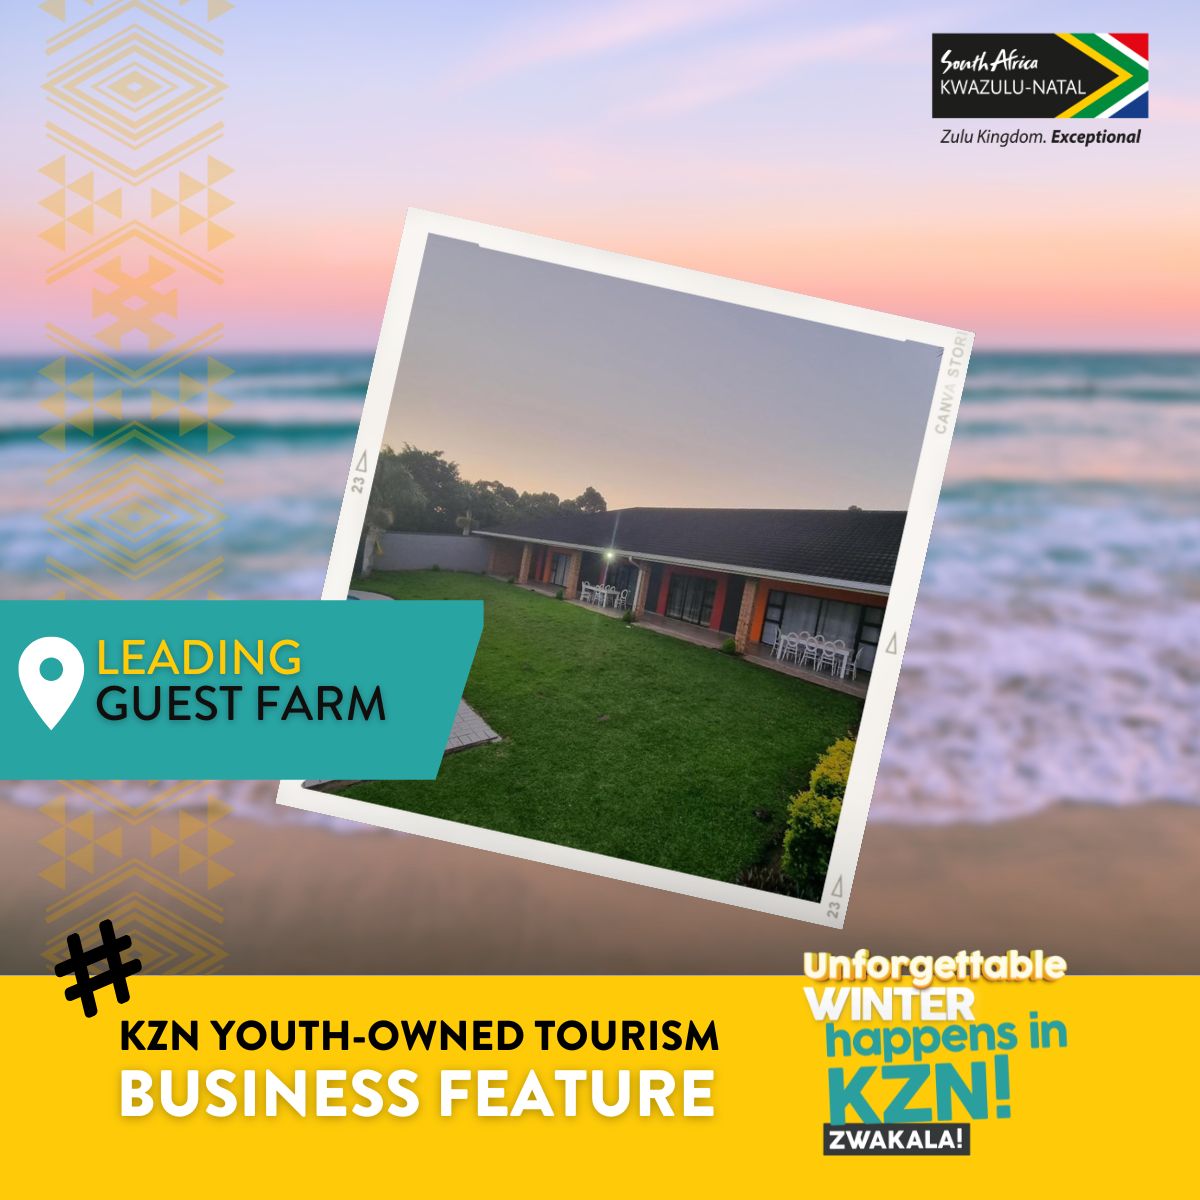 Today we are featuring Leading Guest Farm - a proudly #KZNYouthInTourism owned accommodation establishment situated in Margate, KZN. Support #YouthOwned tourism businesses, and book your next stay in the South Coast here! Contact Nomsa on 073-521-2096 
#YouthInTourism #YouthMonth